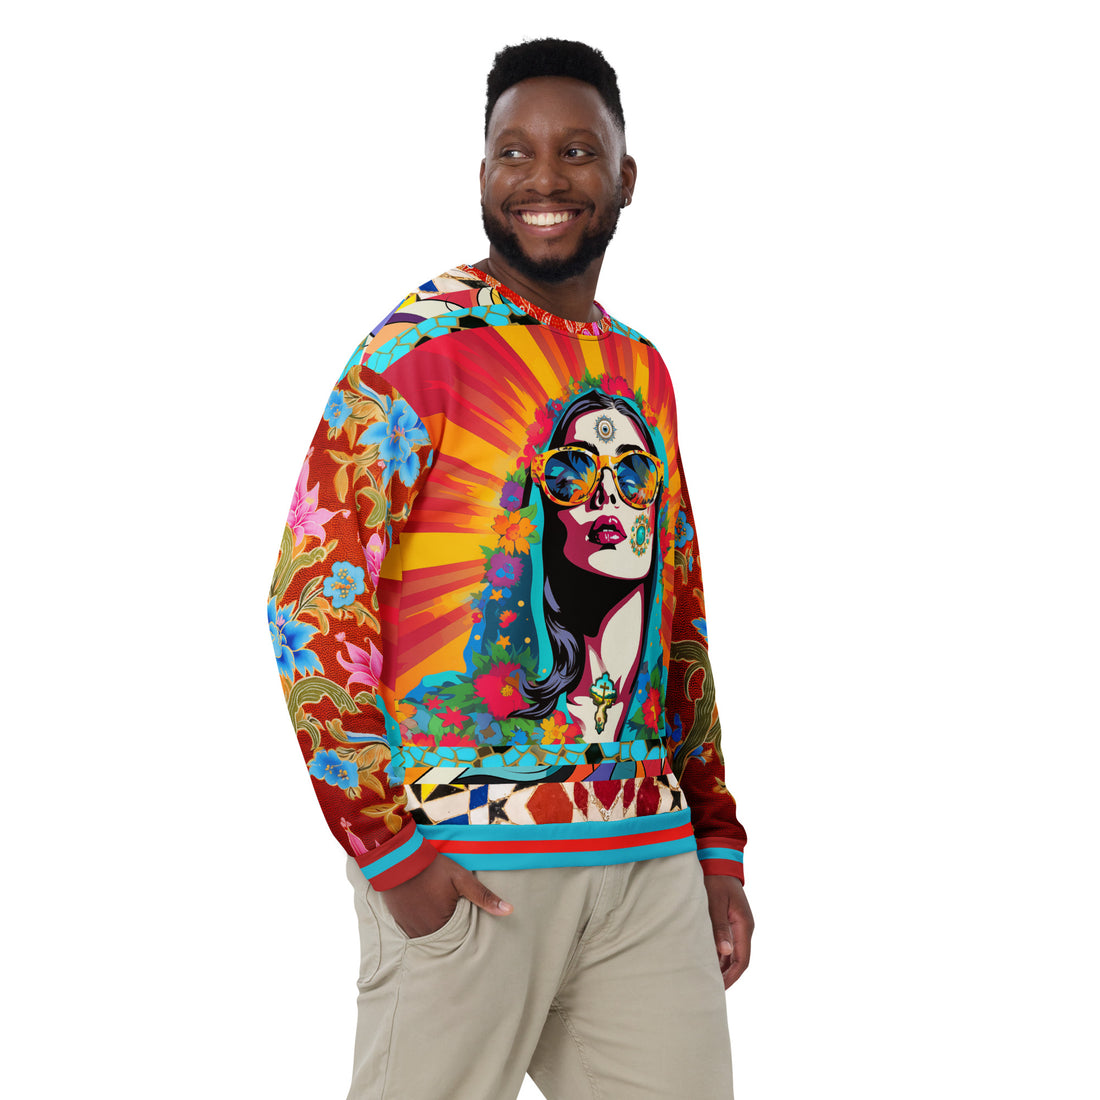 JC Superstar of the 5th Dimension Eco-Poly Summer Weight Unisex Sweatshirt